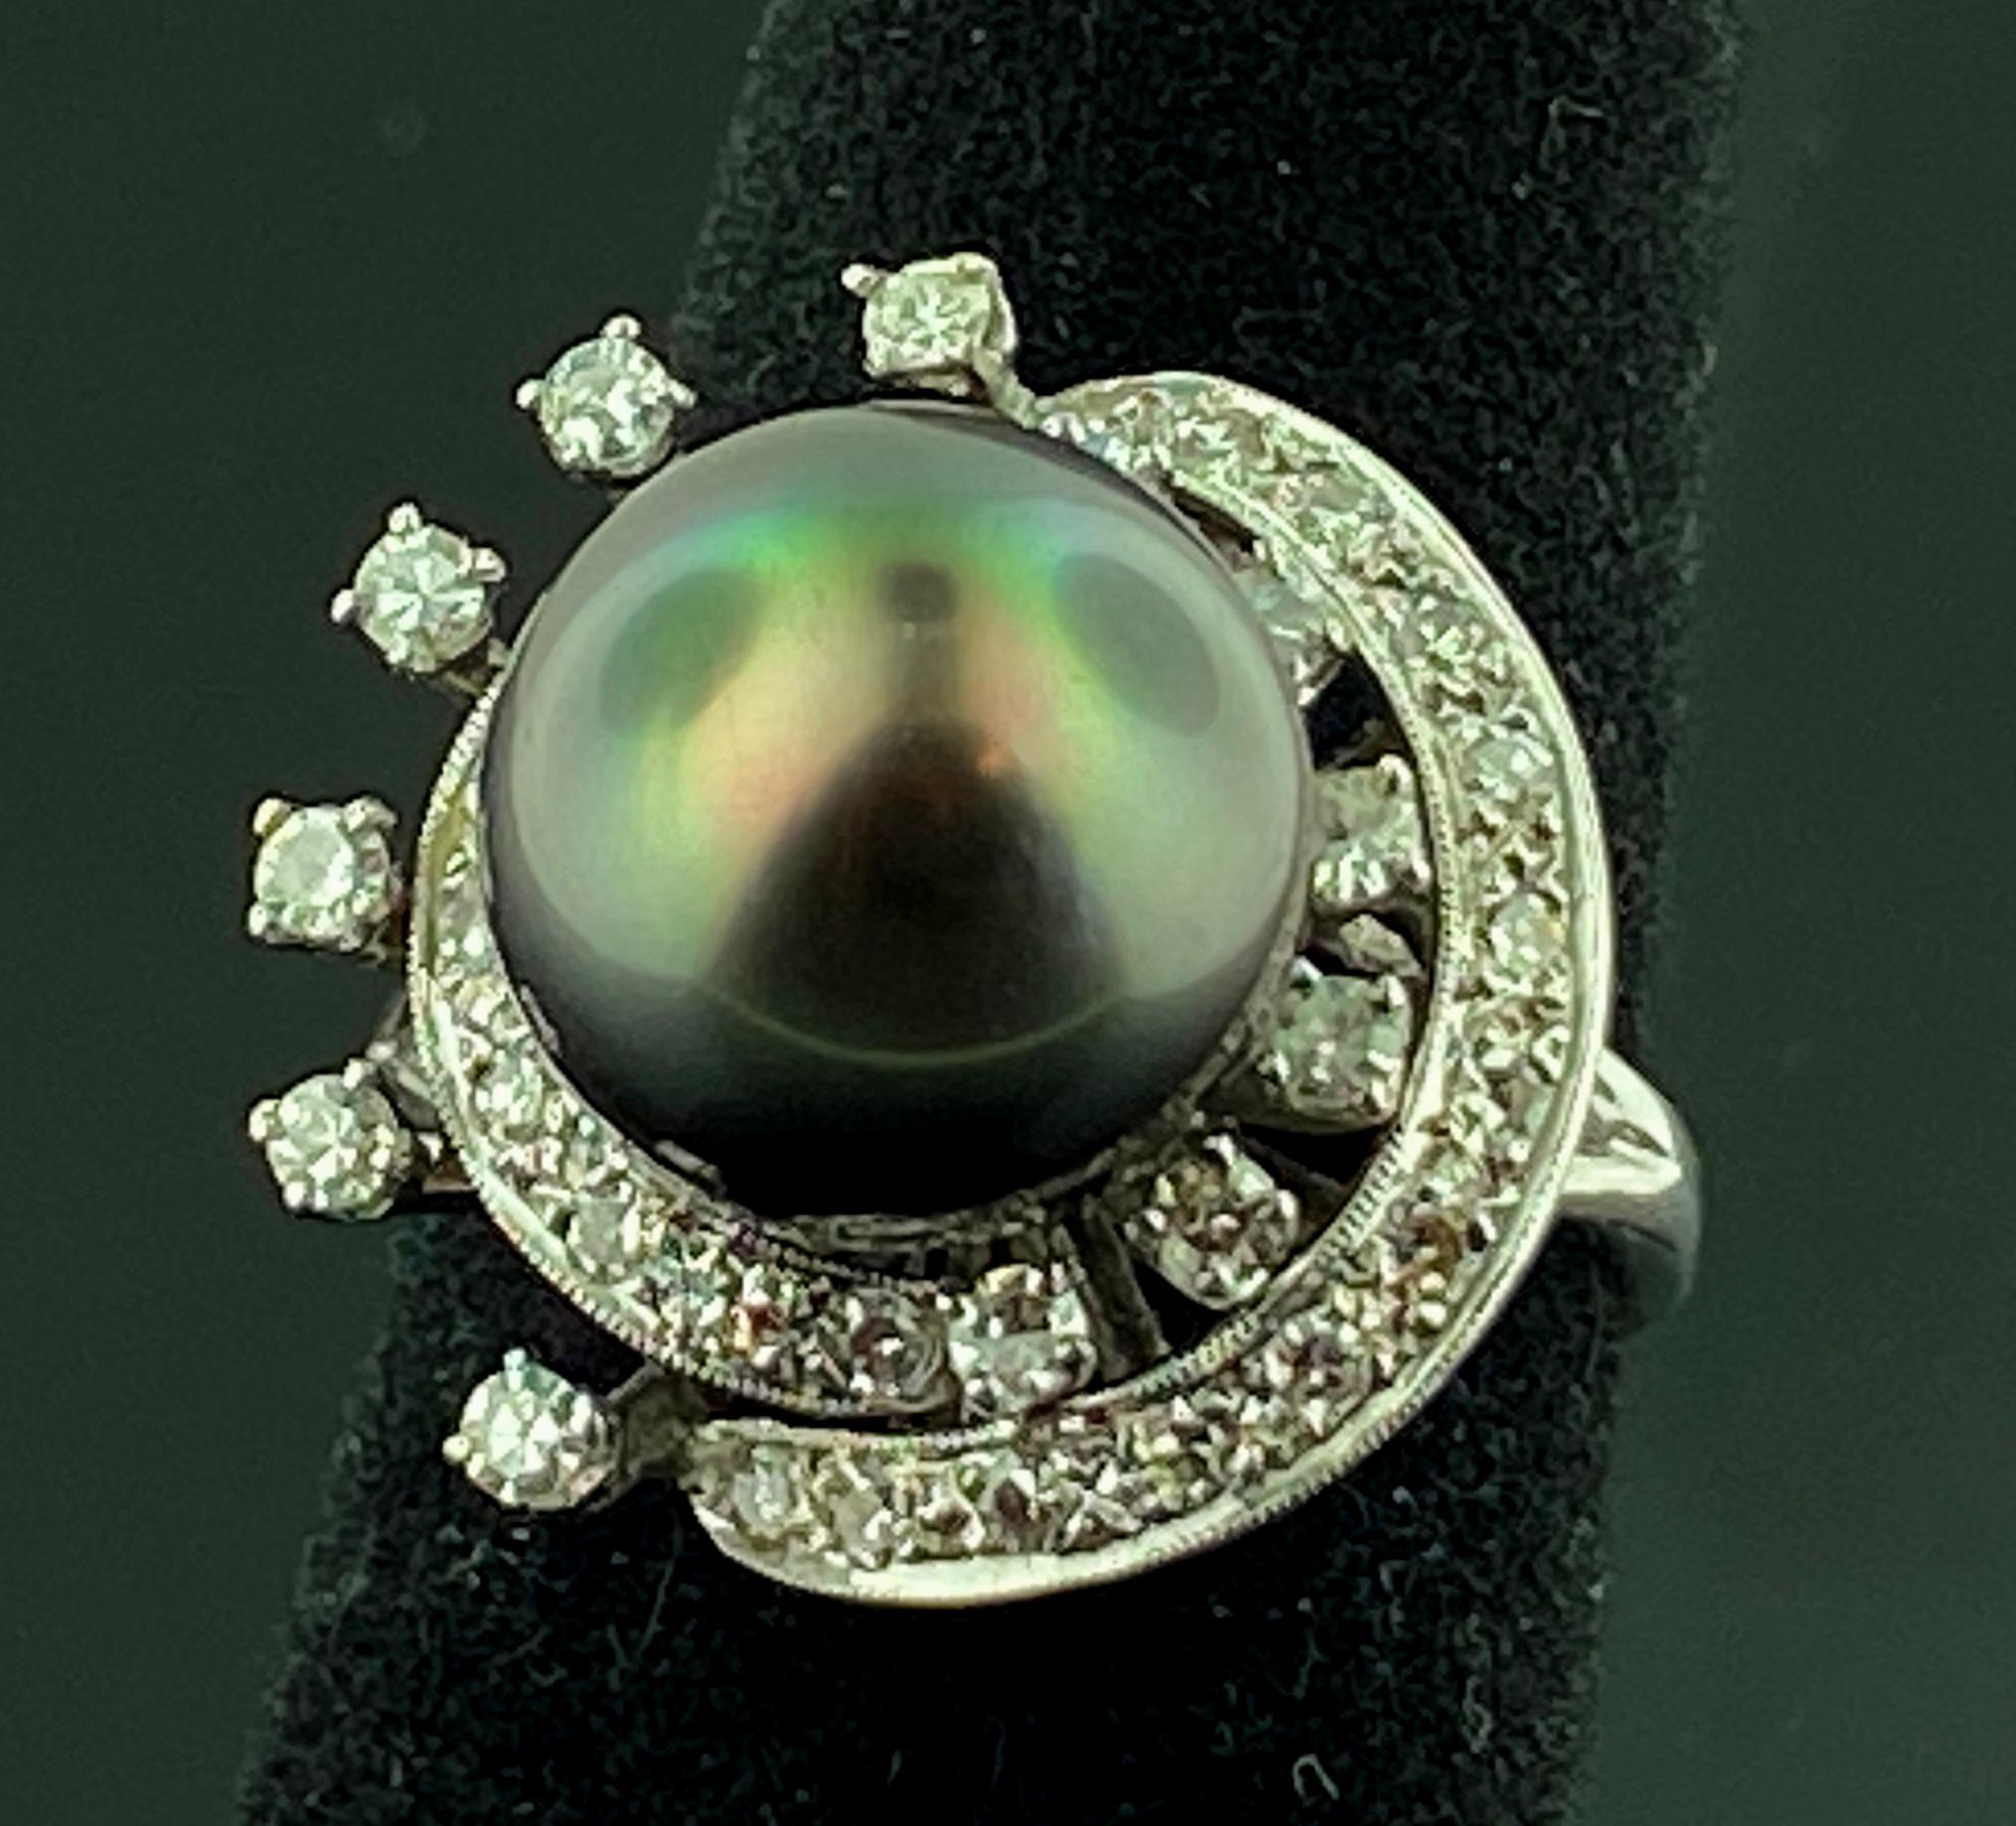 Set in 14 karat white gold is an 11.5 millimeter Tahitian Pearl surrounded with 24 round brilliant cut diamonds with a total diamond weight of 0.75 carats.  Color is H, Clarity is VS.  Ring size is 7.